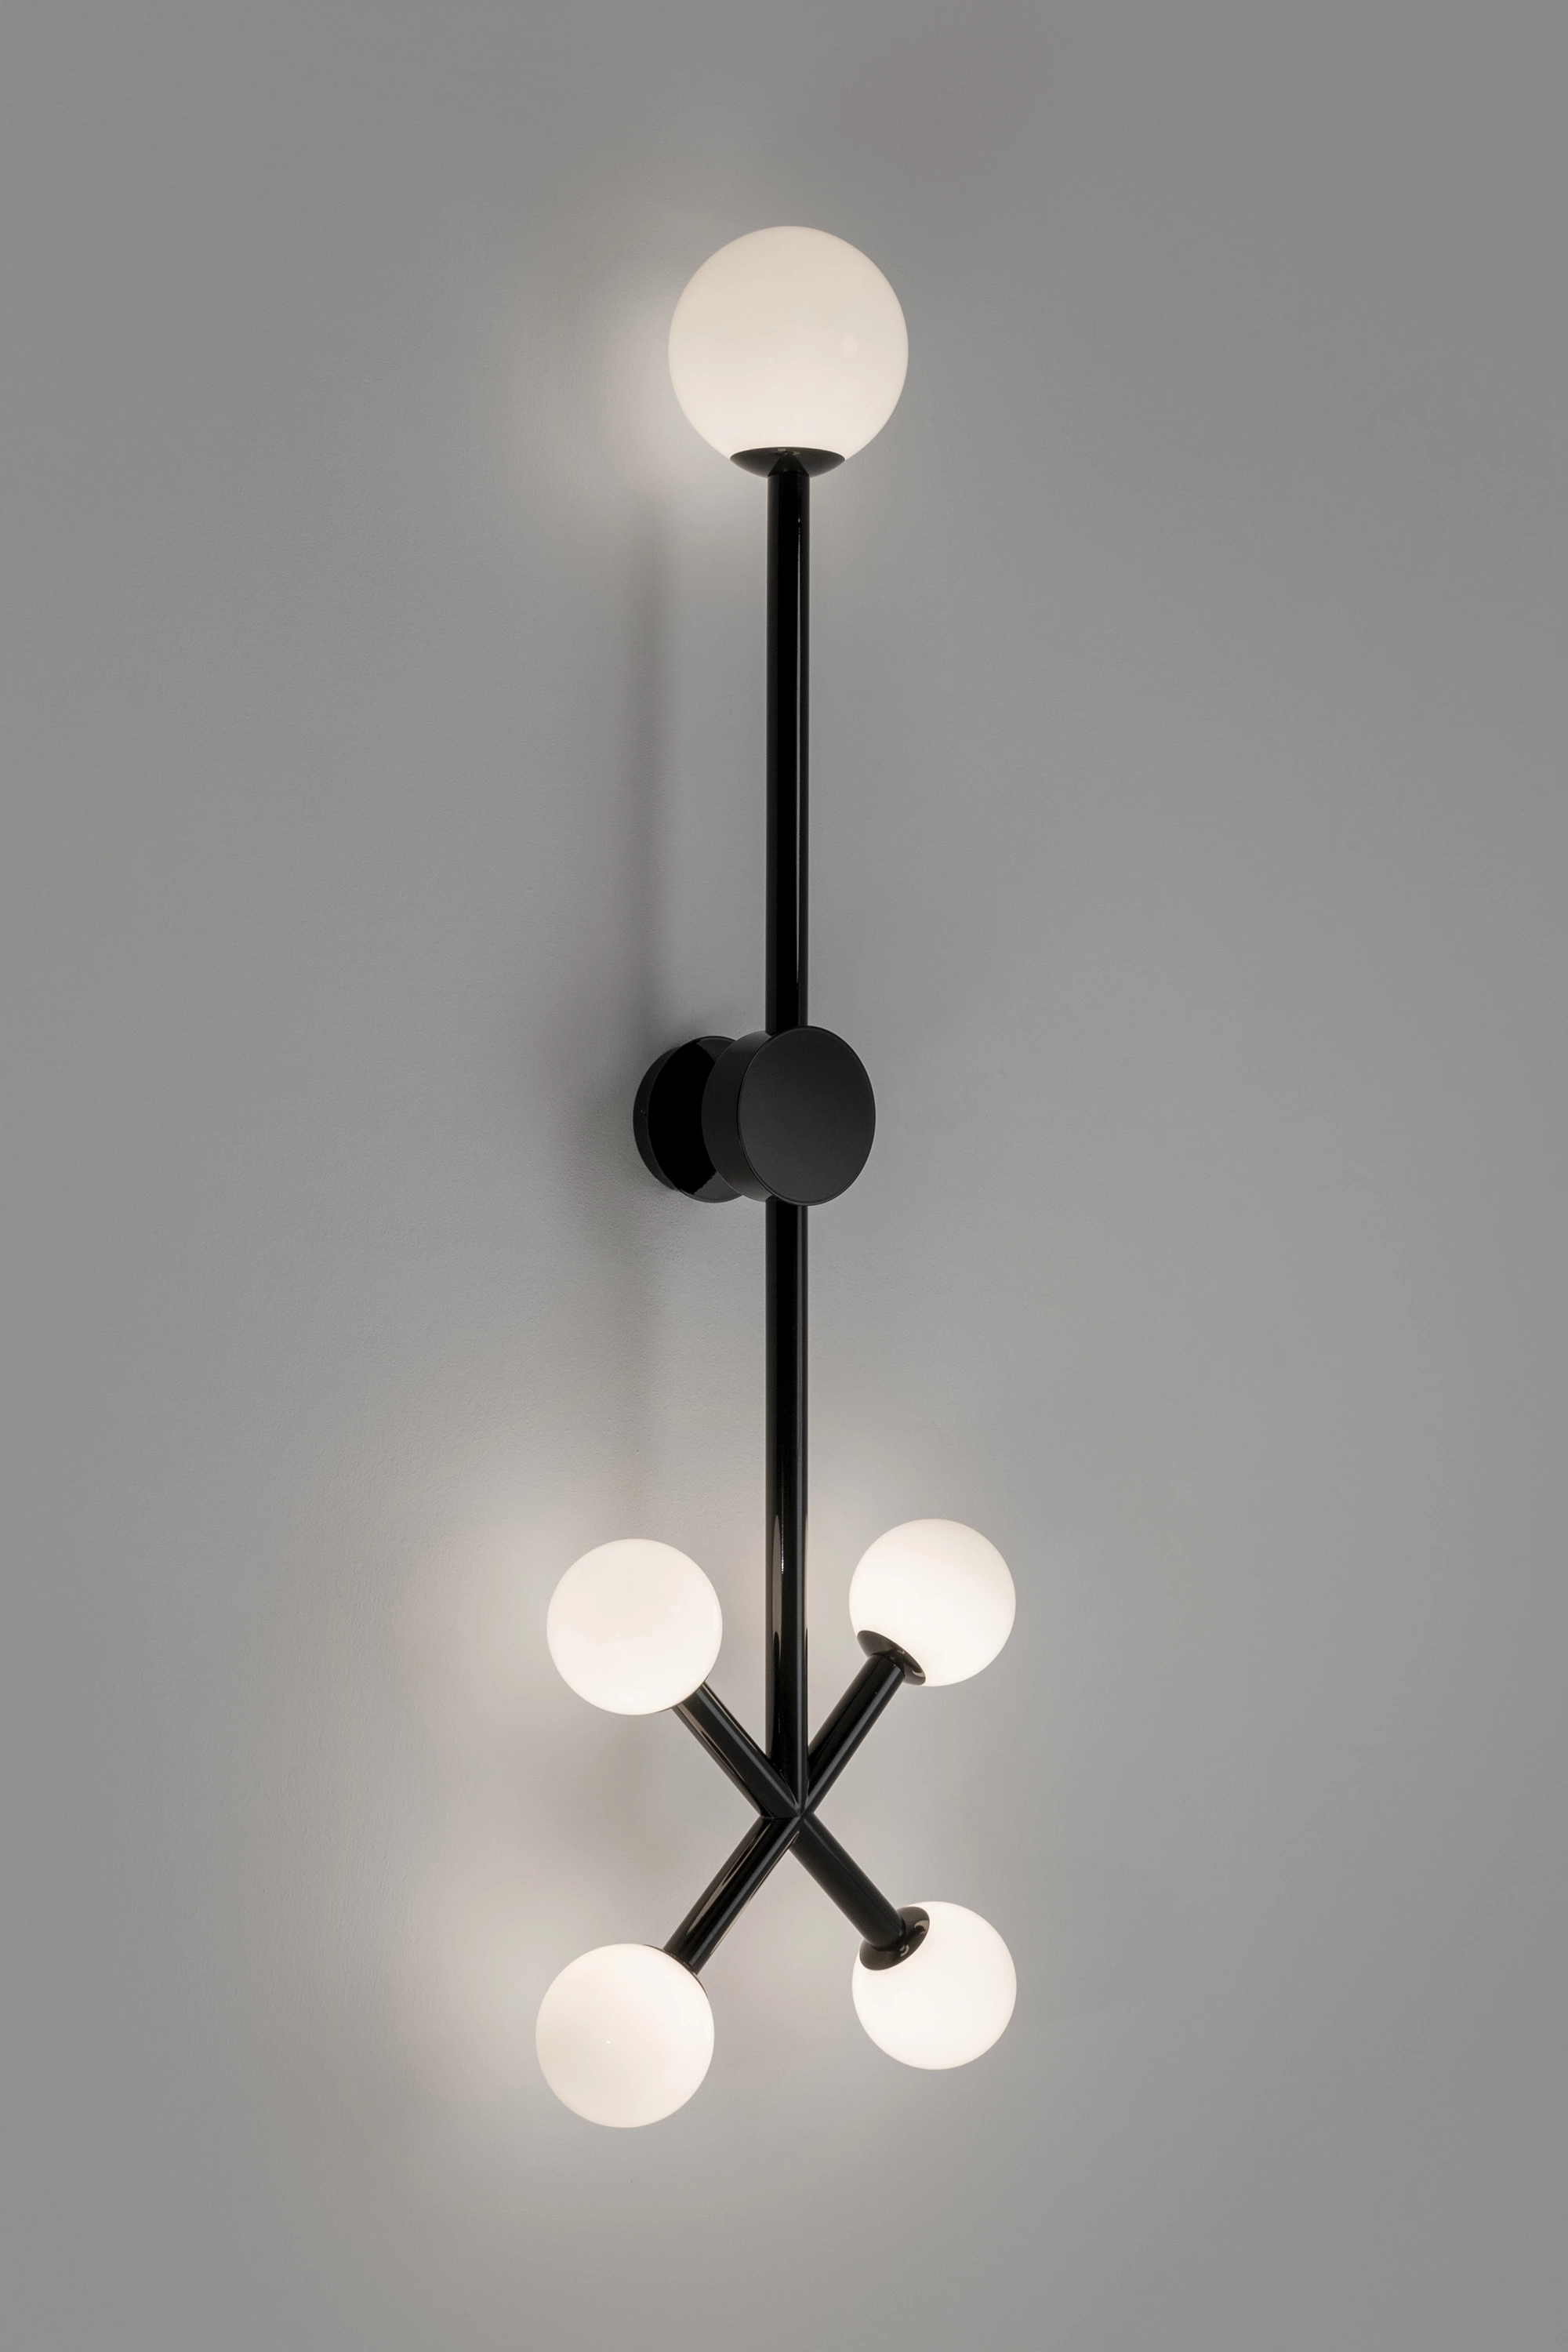 Wink lacquered - Jaime Hayon - Wall light - Galerie kreo